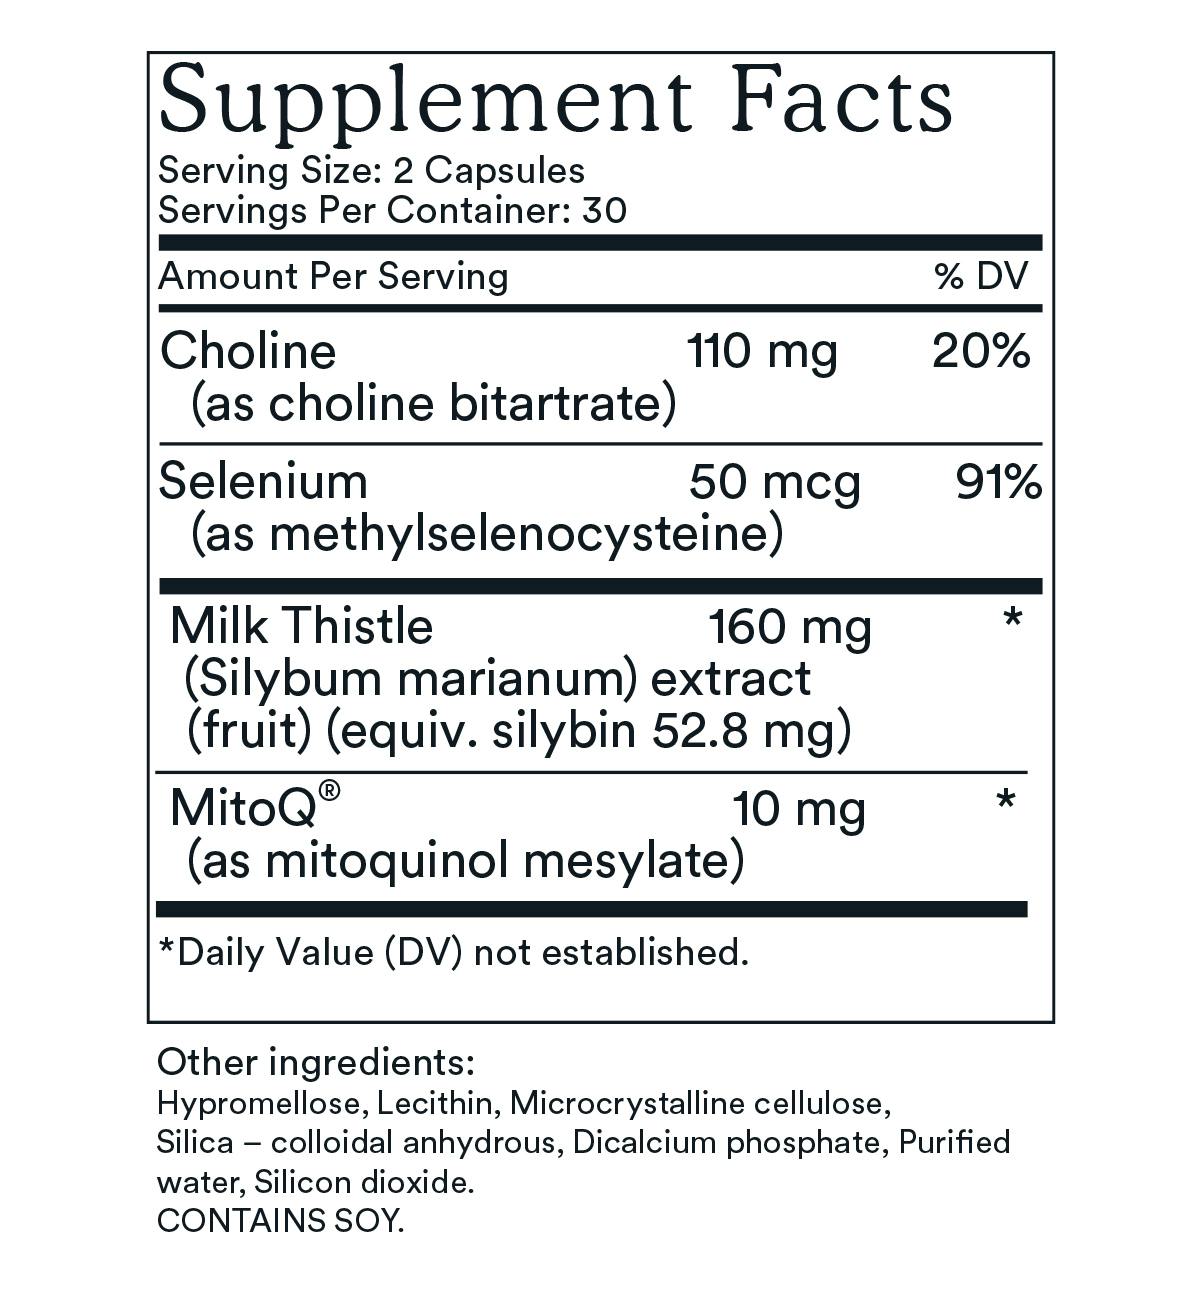 Supplement Facts label for MitoQ +liver